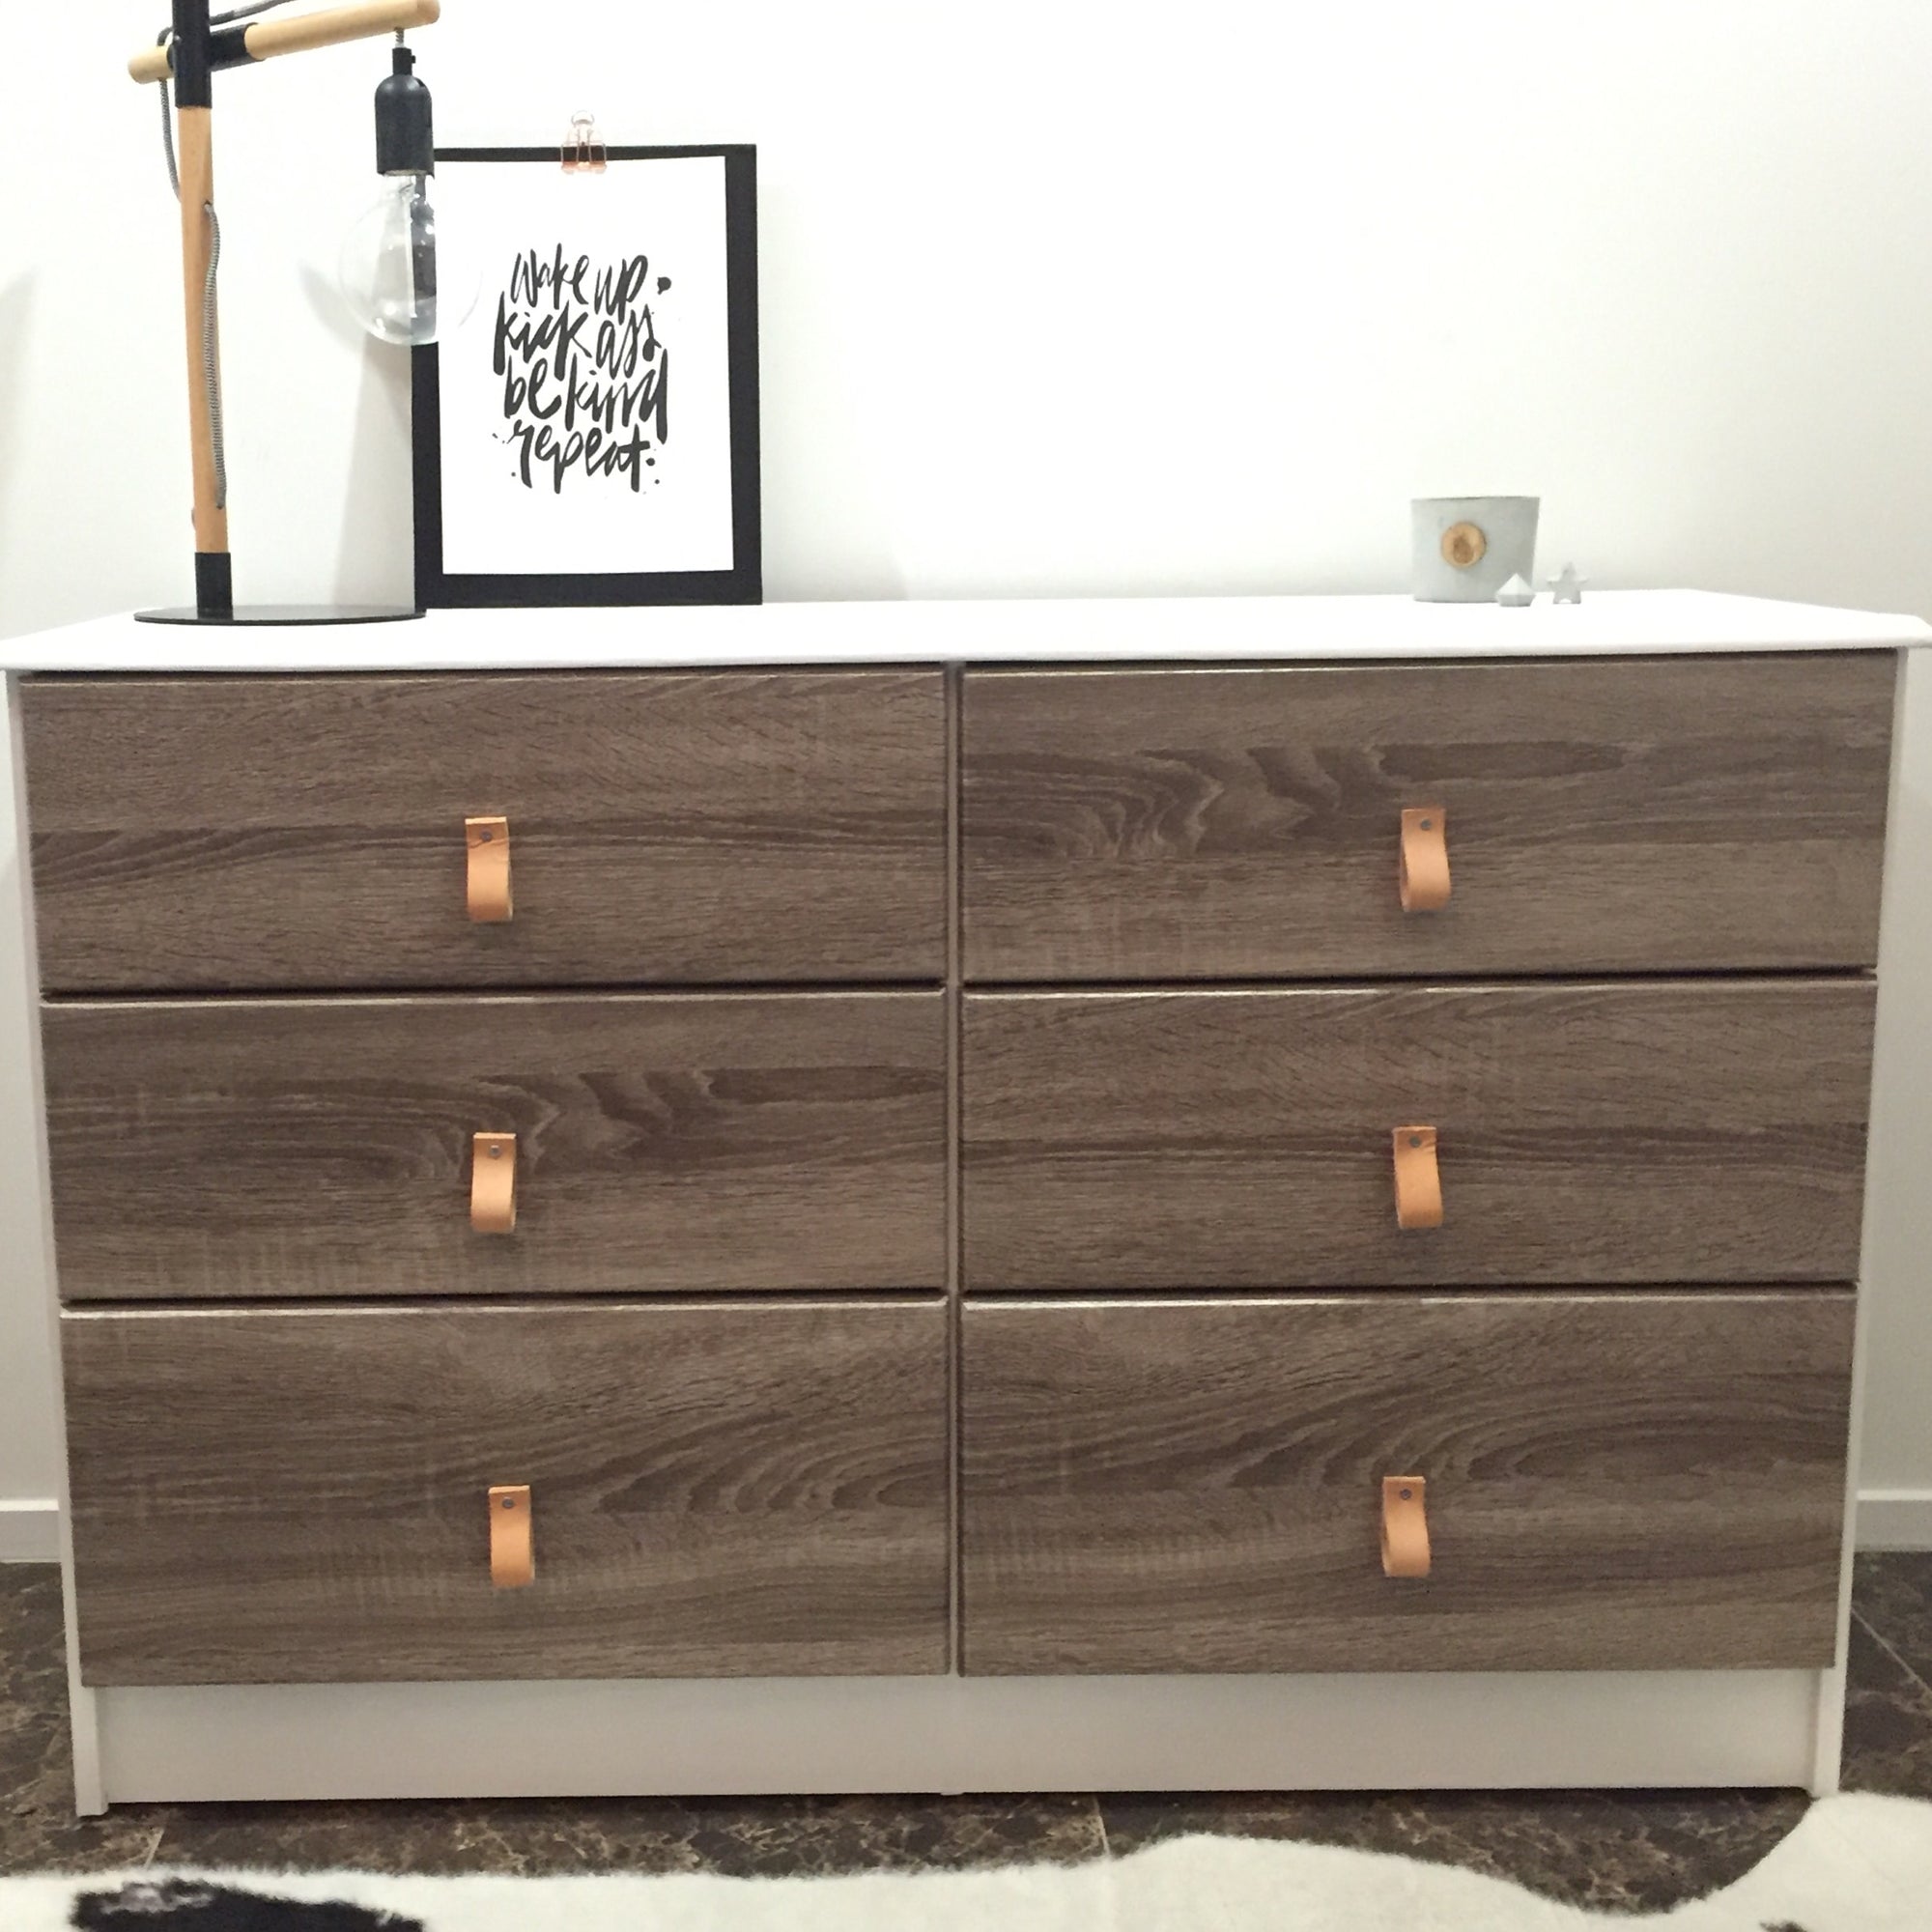 Vinyl covered drawers in whitewood and sonama oak with leather pulls